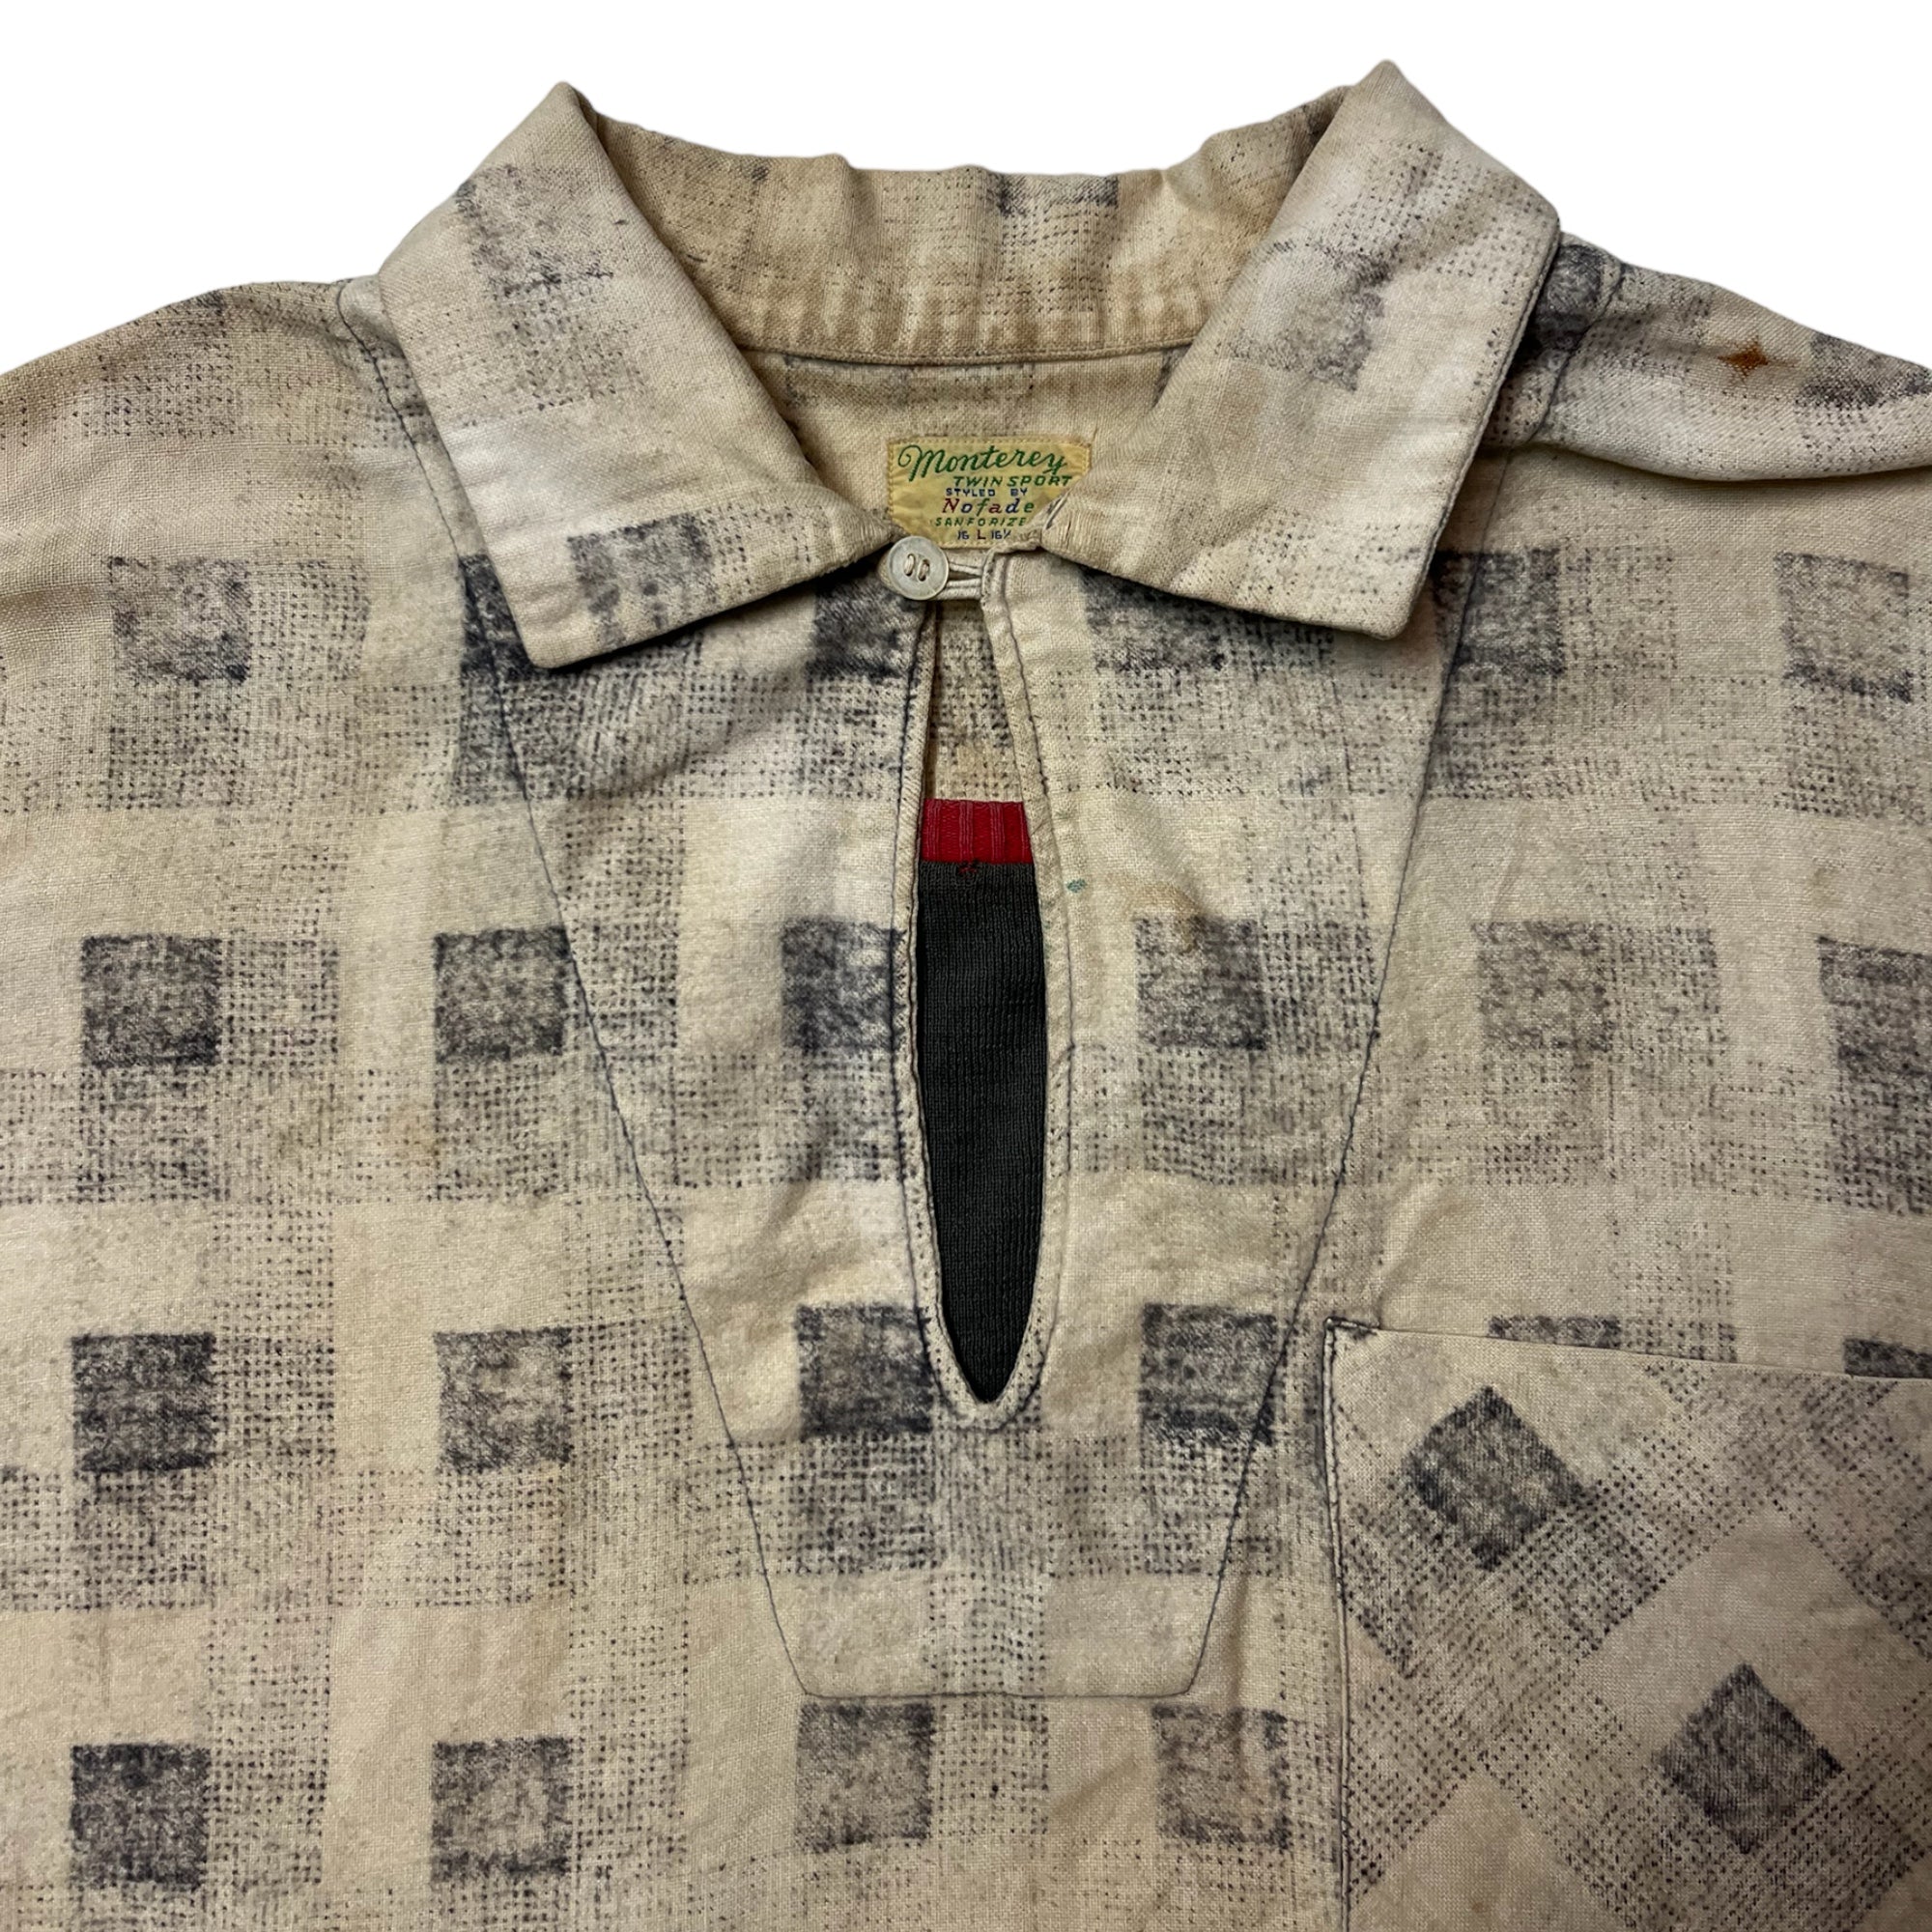 1950s Distressed ‘Double-Layered’ Popover Loop Collar Flannel Shirt - Cream/Faded Black - L